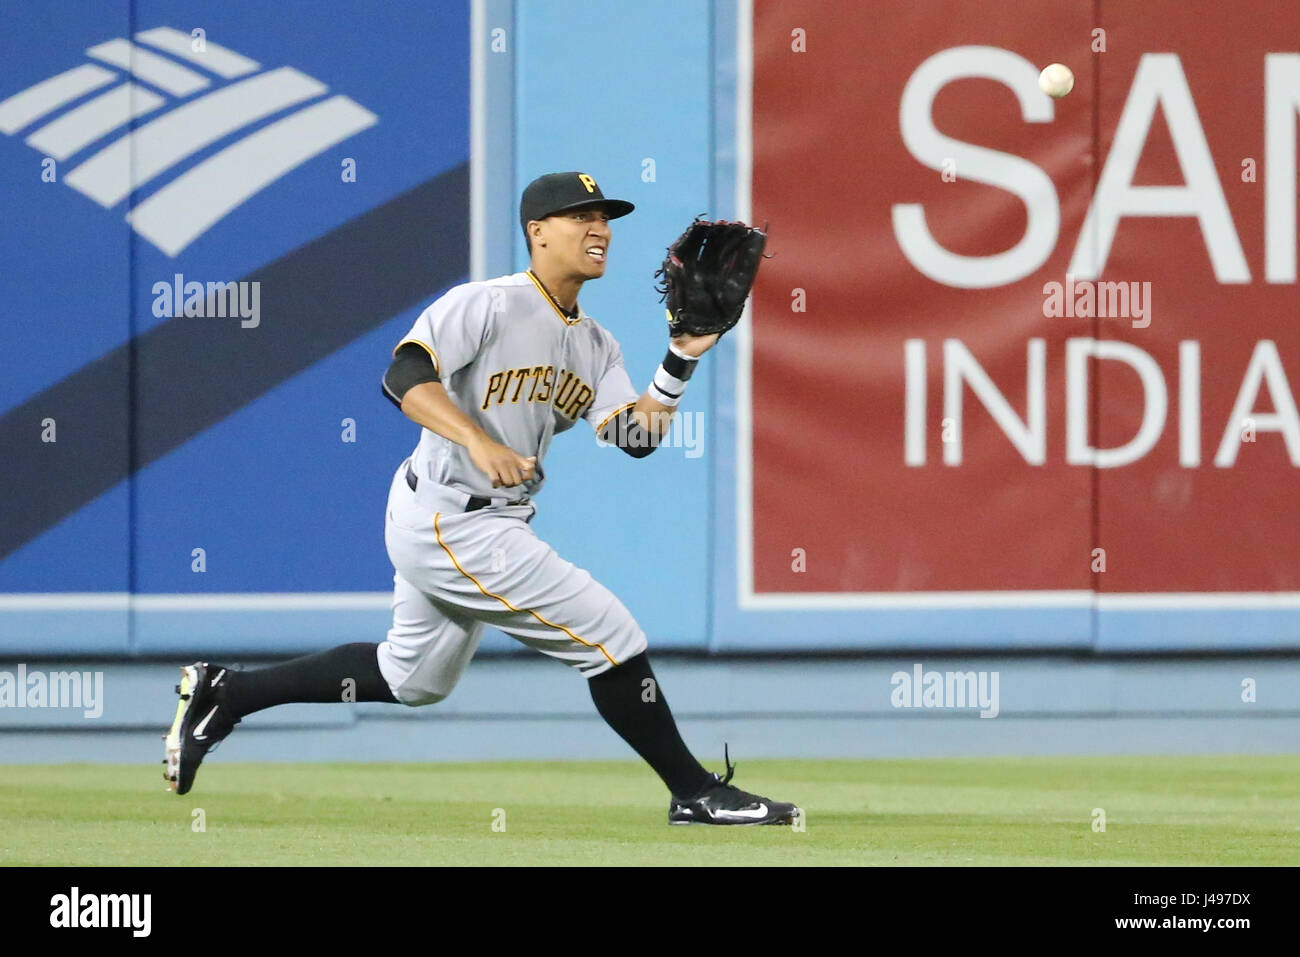 Los Angeles, CA, USA. 9th May, 2017. Pittsburgh Pirates left fielder Chris Bostick #63 a running catch in left field makes a running catch in the game between the Pittsburg Pirates and the Los Angeles Dodgers, Dodger Stadium in Los Angeles, CA. Credit: csm/Alamy Live News Stock Photo